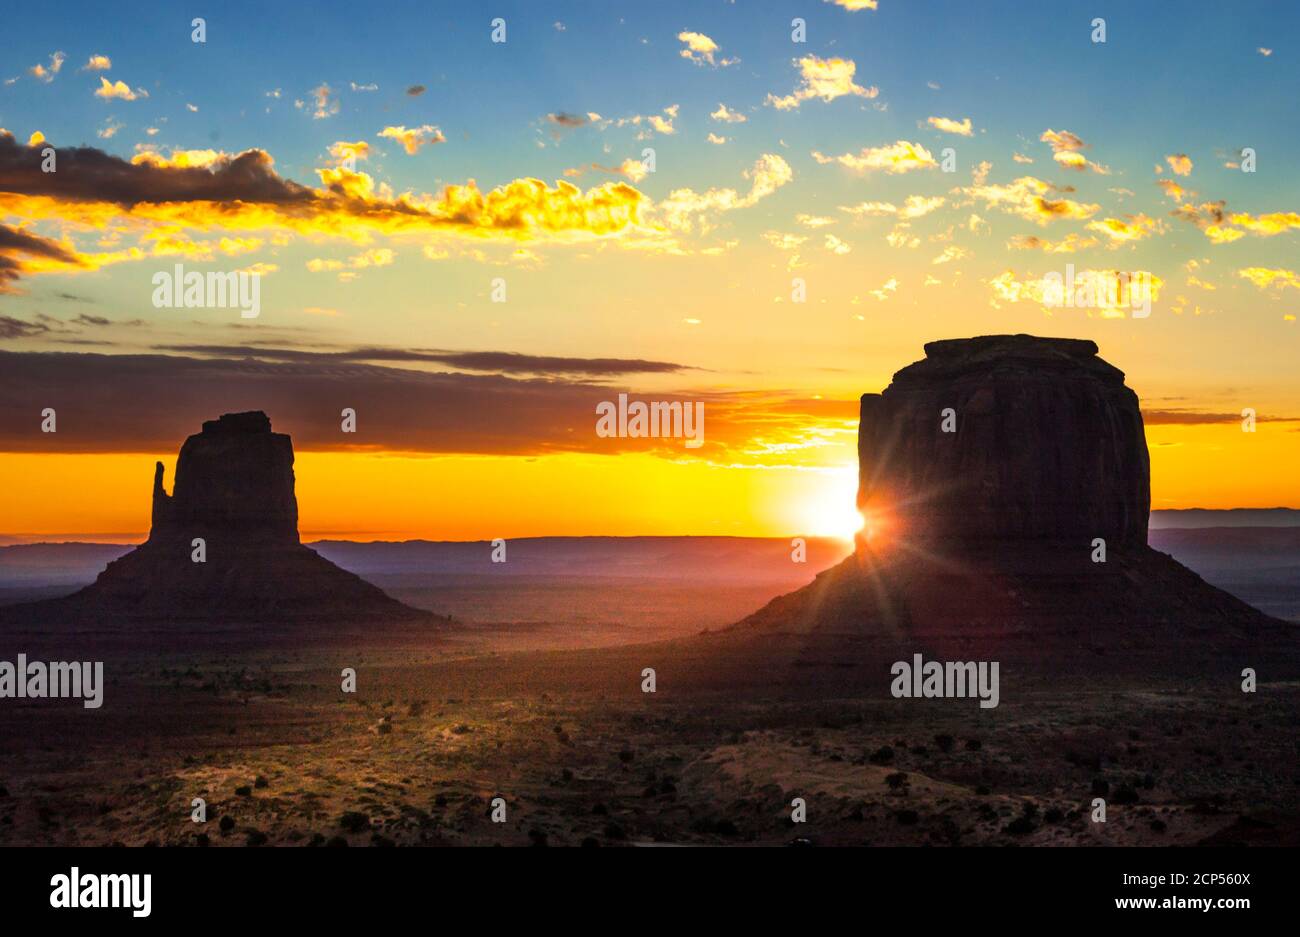 Monument Valley mitten buttes with sunburst at sunset, Utah, USA. Stock Photo